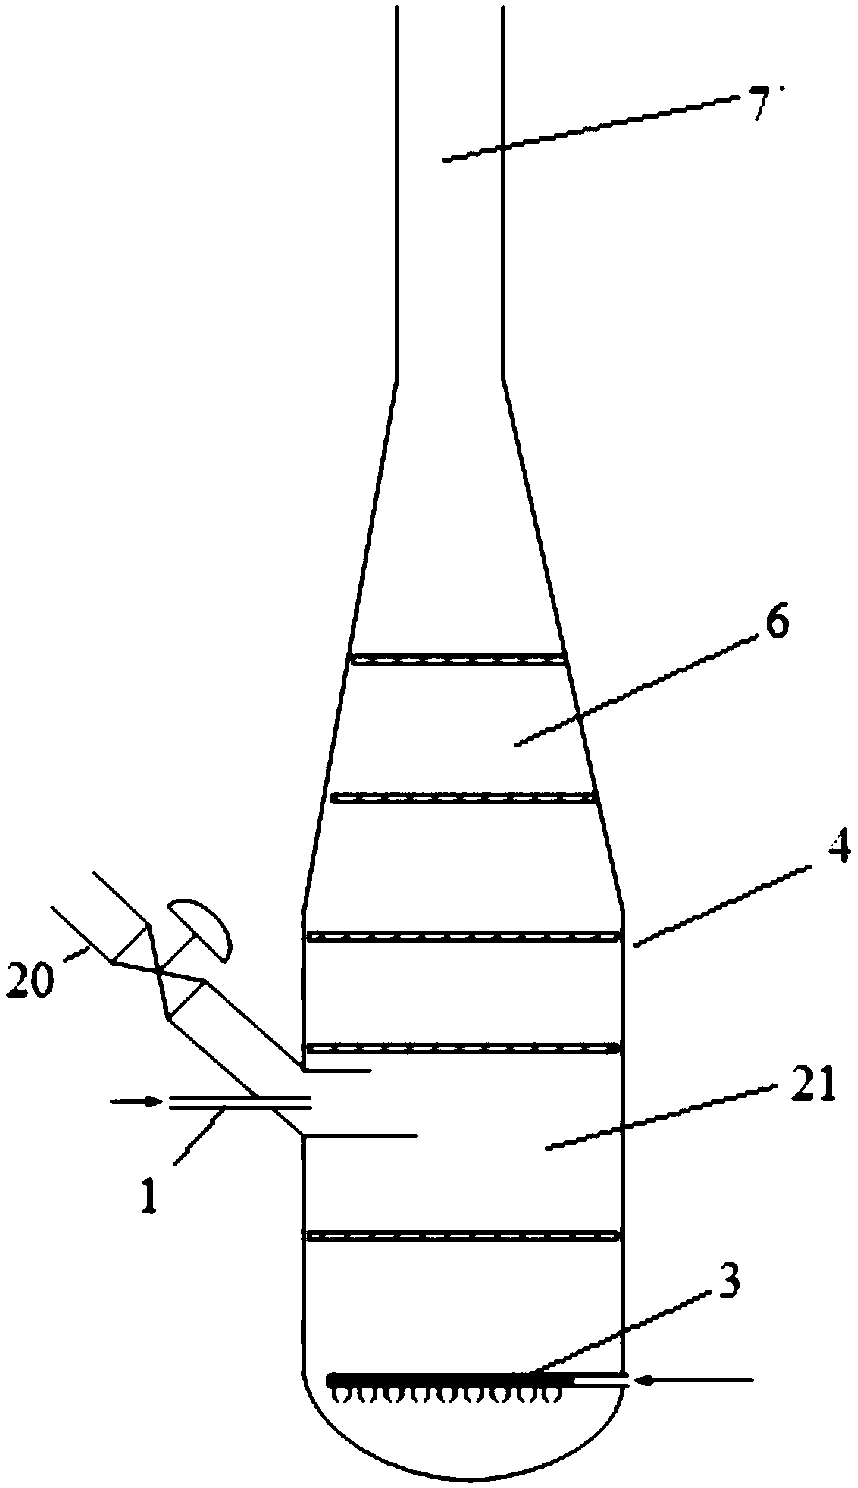 Circulating fluid bed reaction device for preparing olefin from alkane through catalytic dehydrogenation or catalytic cracking